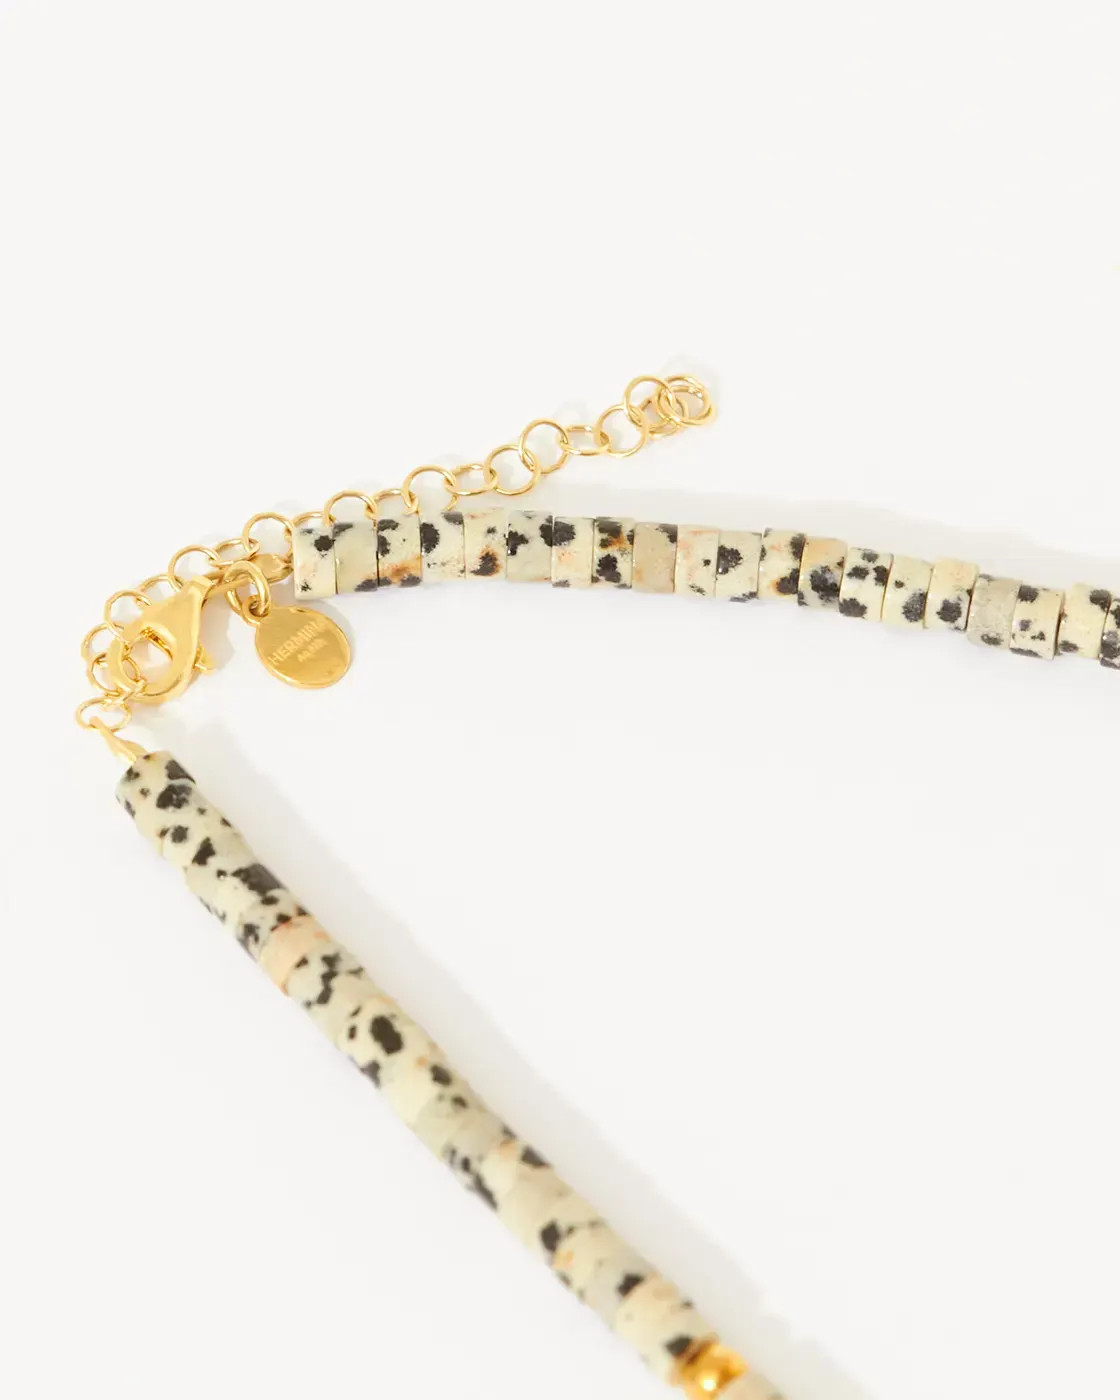 Croc Dundee Dalmatian Jasper and Perl Necklace